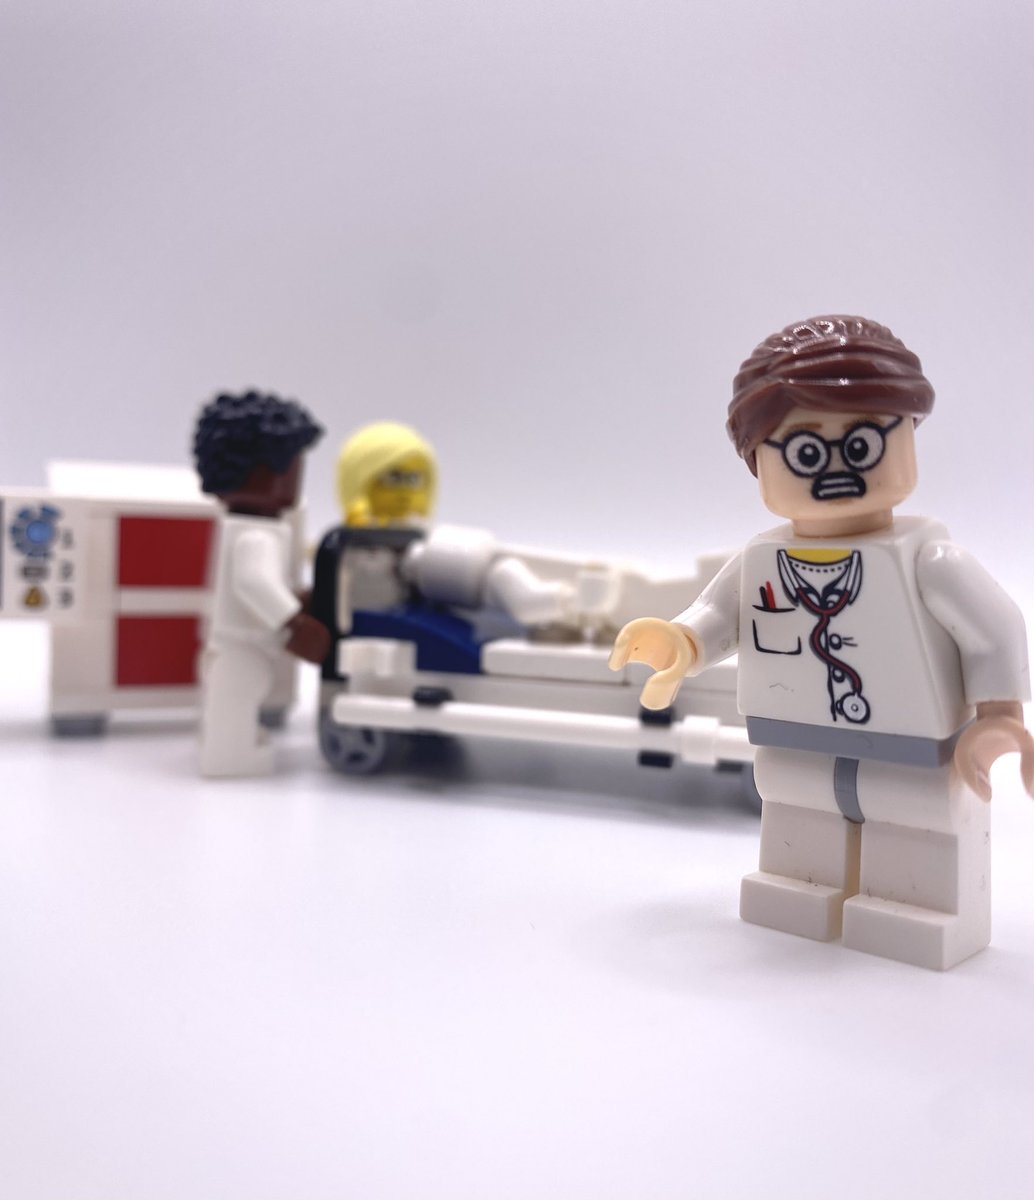 14/50 Learning with ‘good stress’ in a group can be transformative in sim. However (& thankfully) we’re not all the same How do you work with and mitigate unnecessary stress for those that live with social anxiety and neurodivergence? #SafeSimulationForAll #EmbraceDiversity